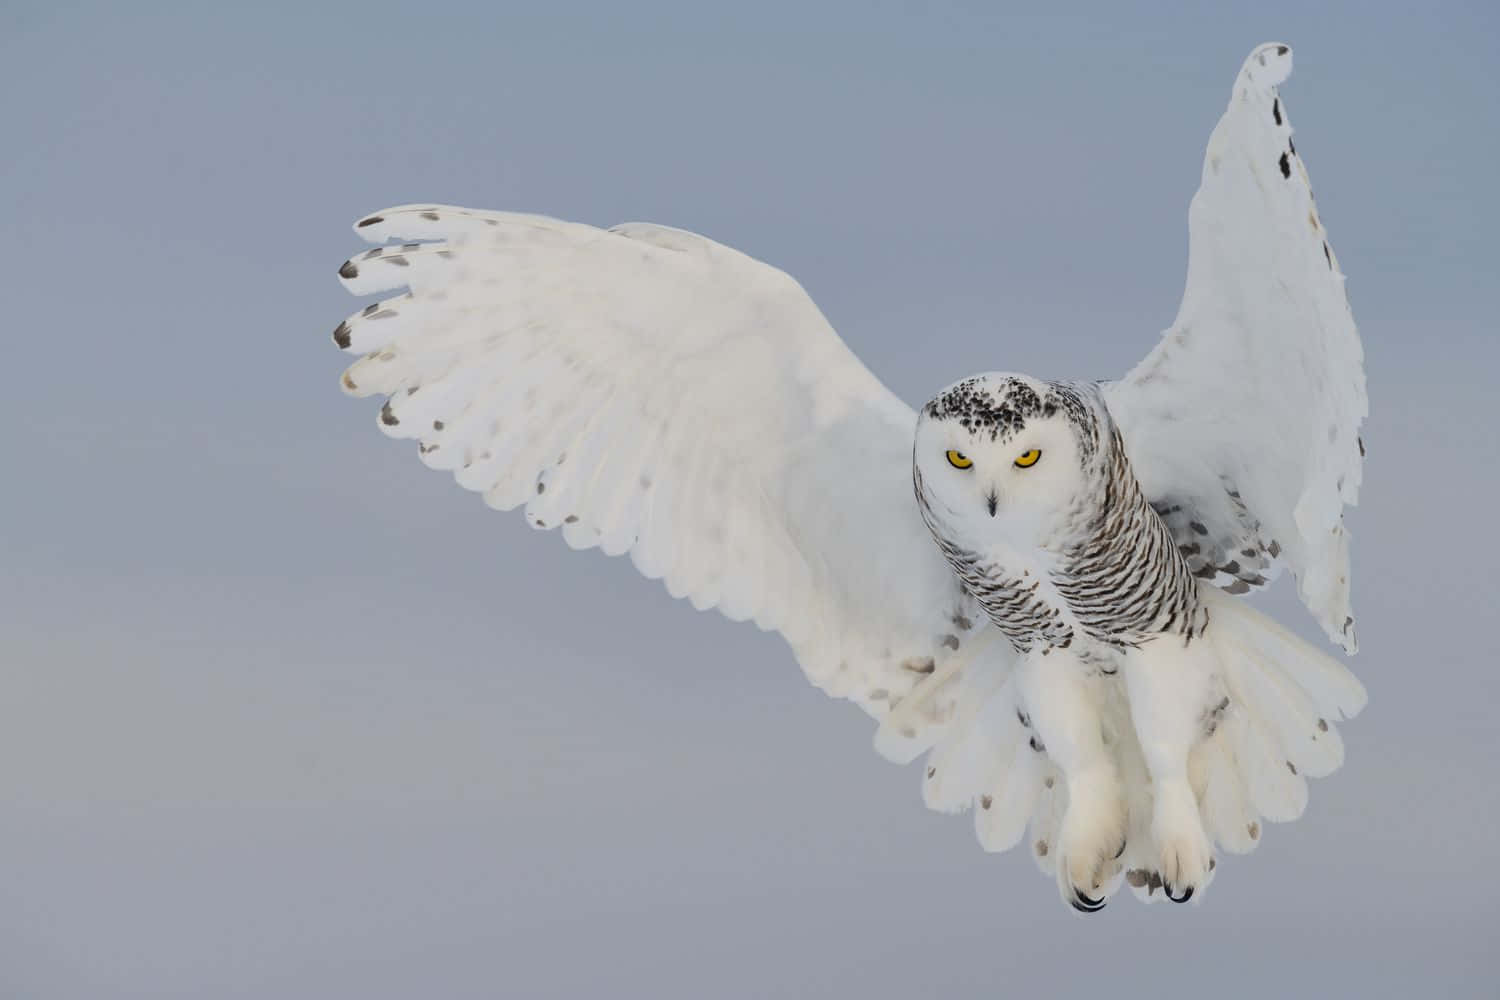 Staring Into the Eyes of the Snowy Owl